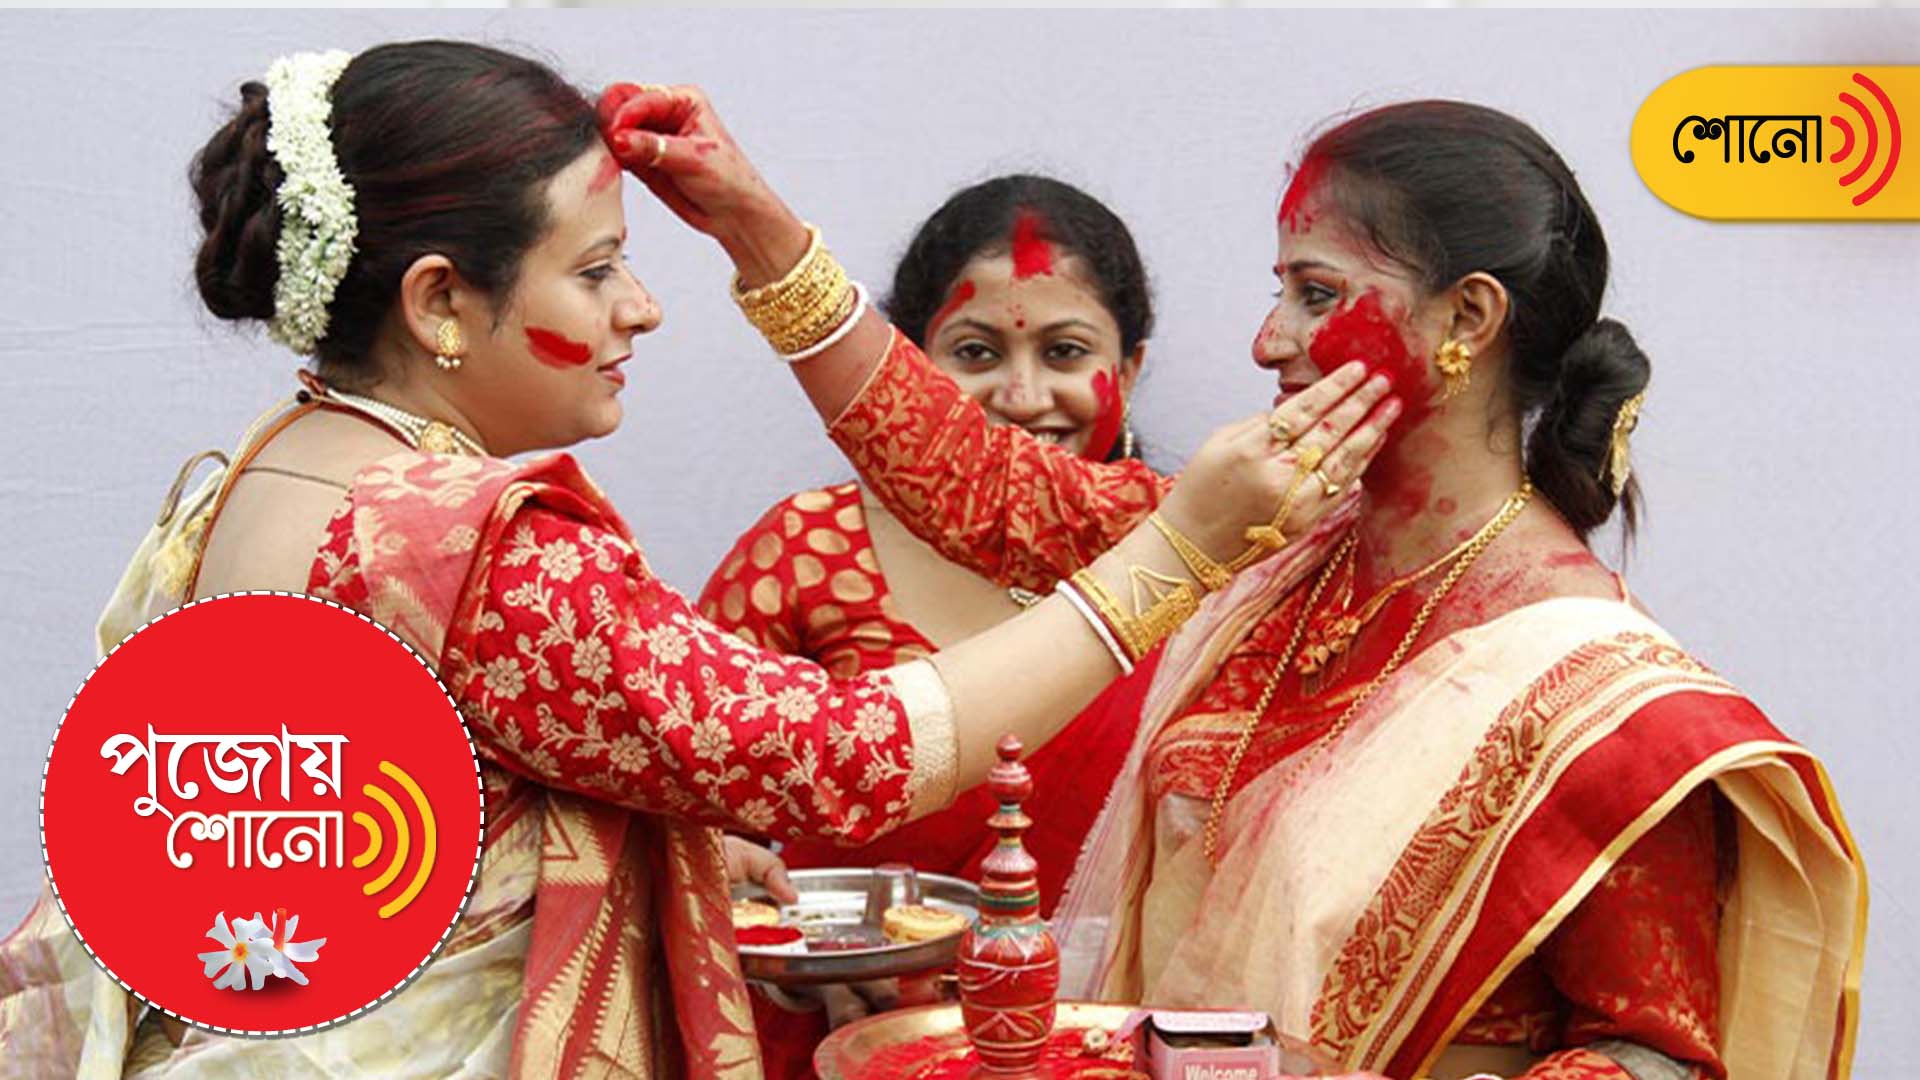 why do married women play with vermilion on Doshomi of Durga Puja